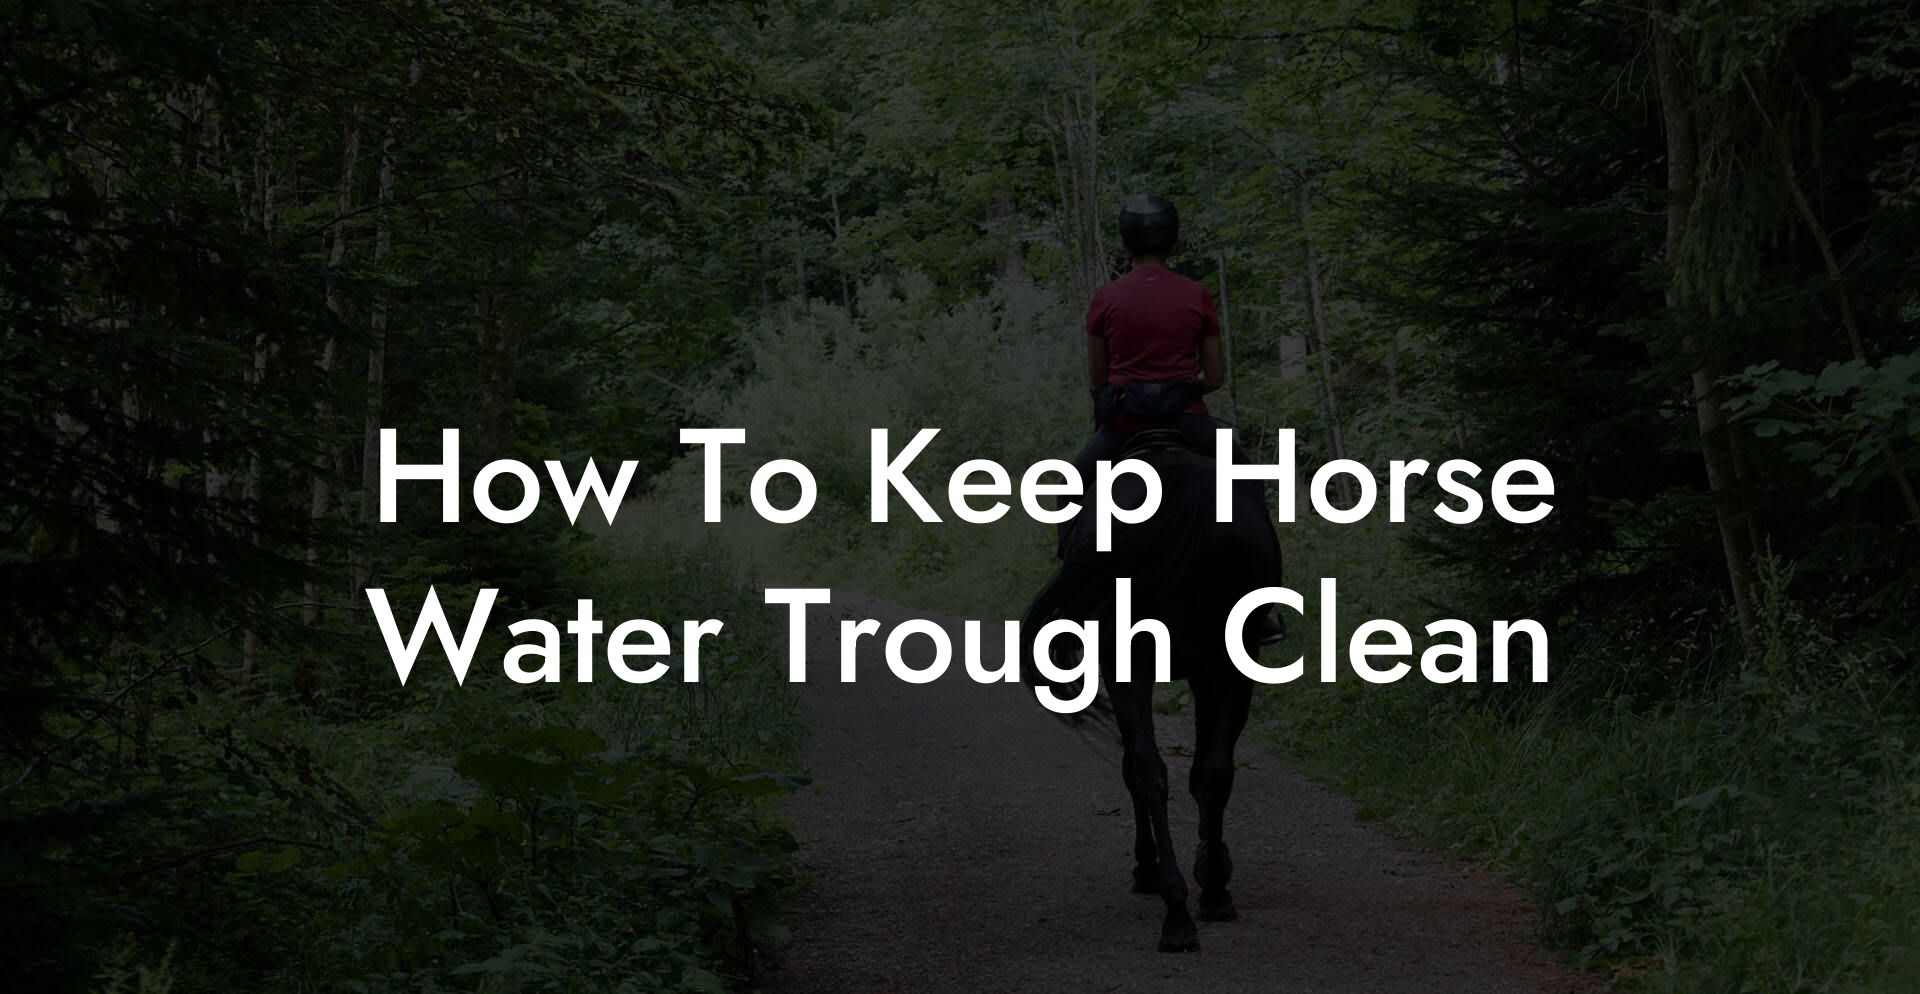 How To Keep Horse Water Trough Clean